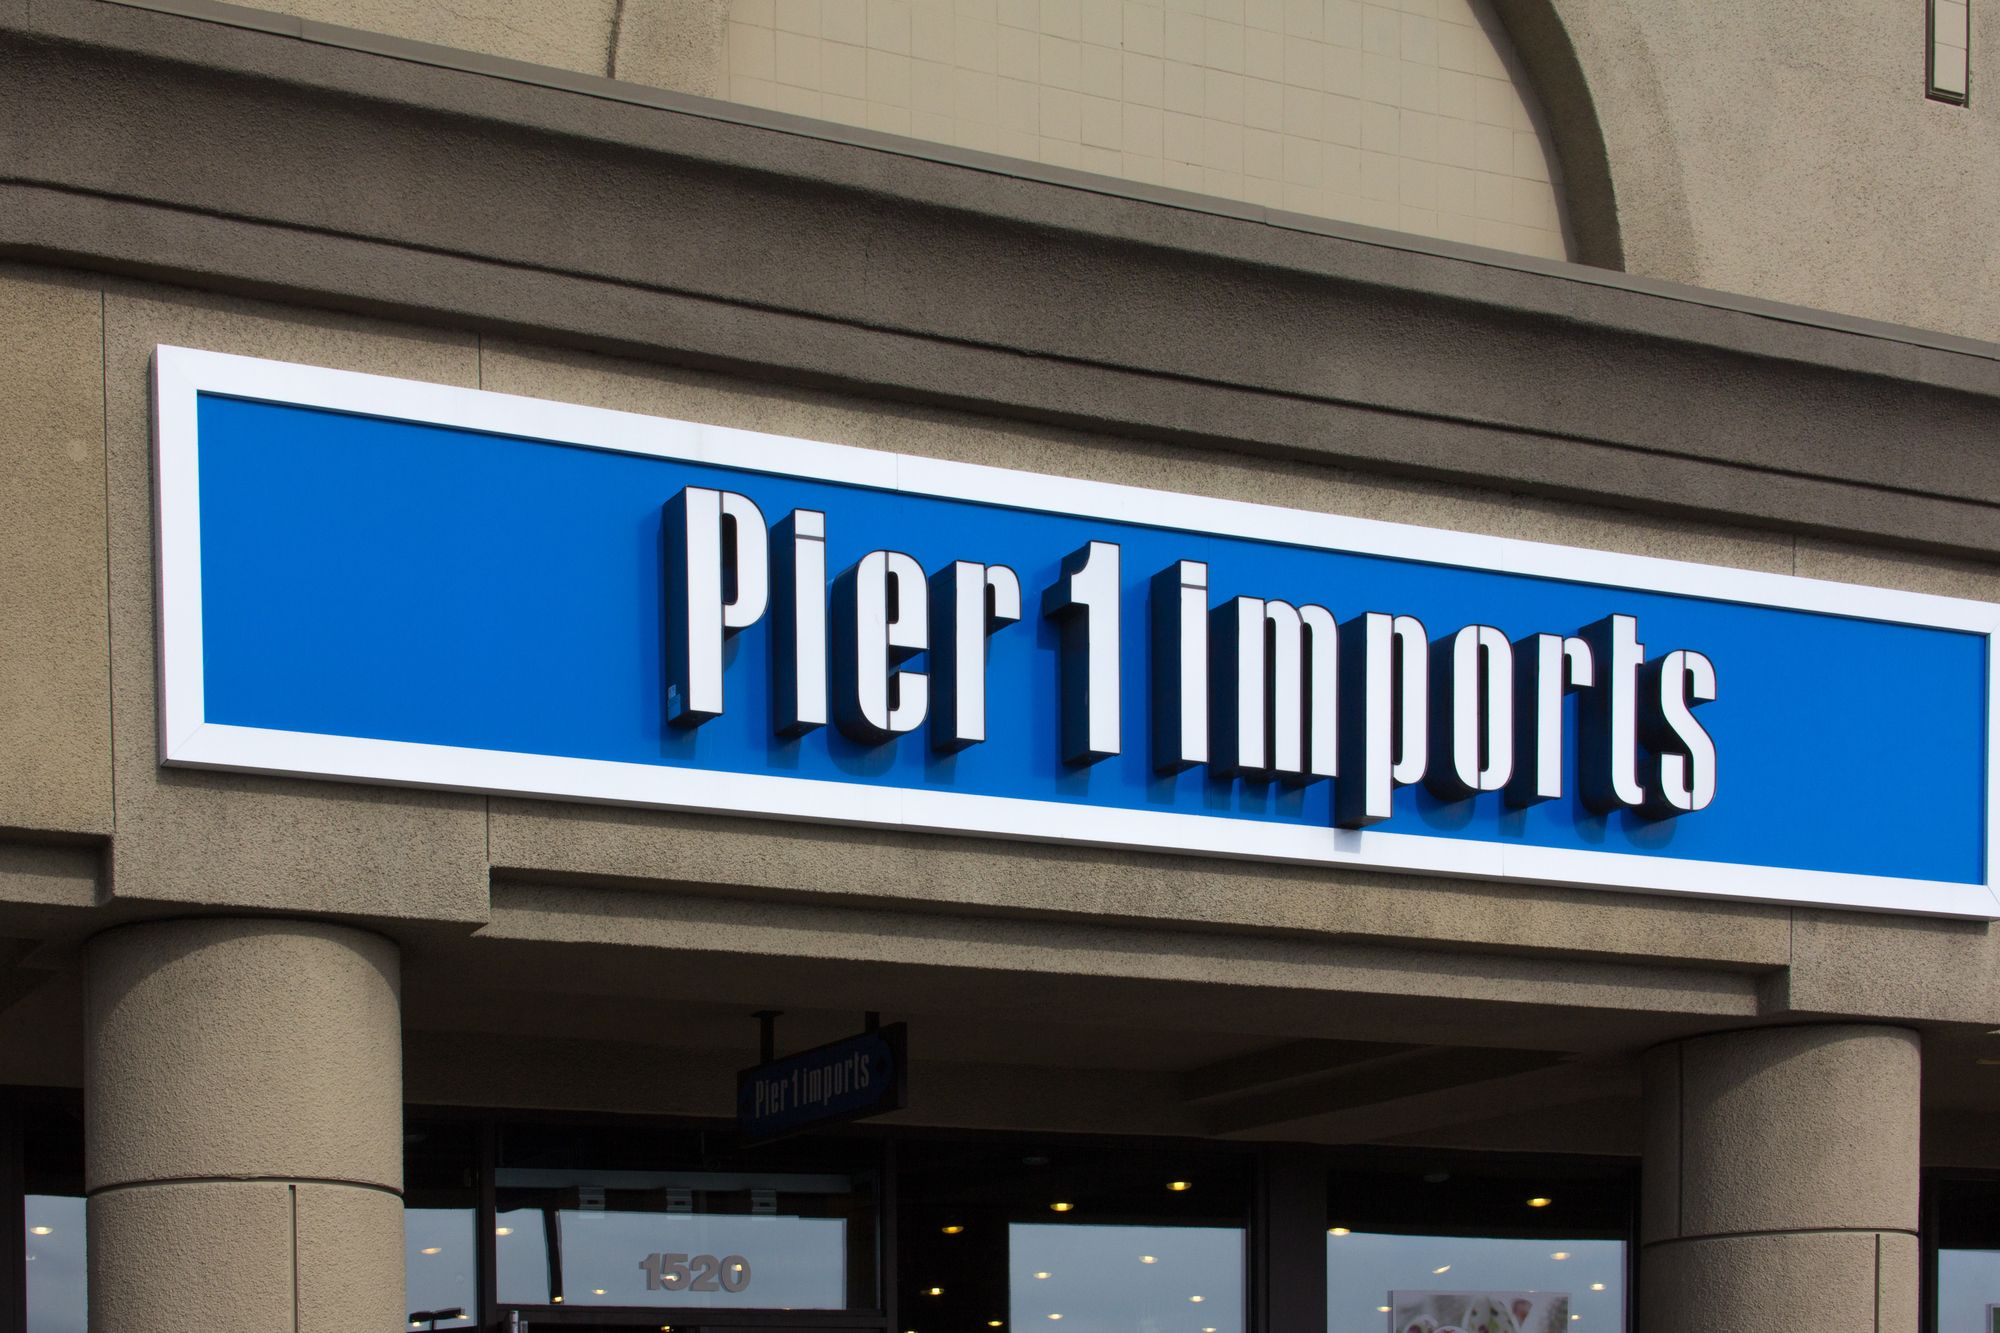 SALINAS, CA/USA - APRIL 8, 2104: Pier 1 Imports exterior sign. Pier 1 Imports is a retailer specializing in imported home furnishings and decor.